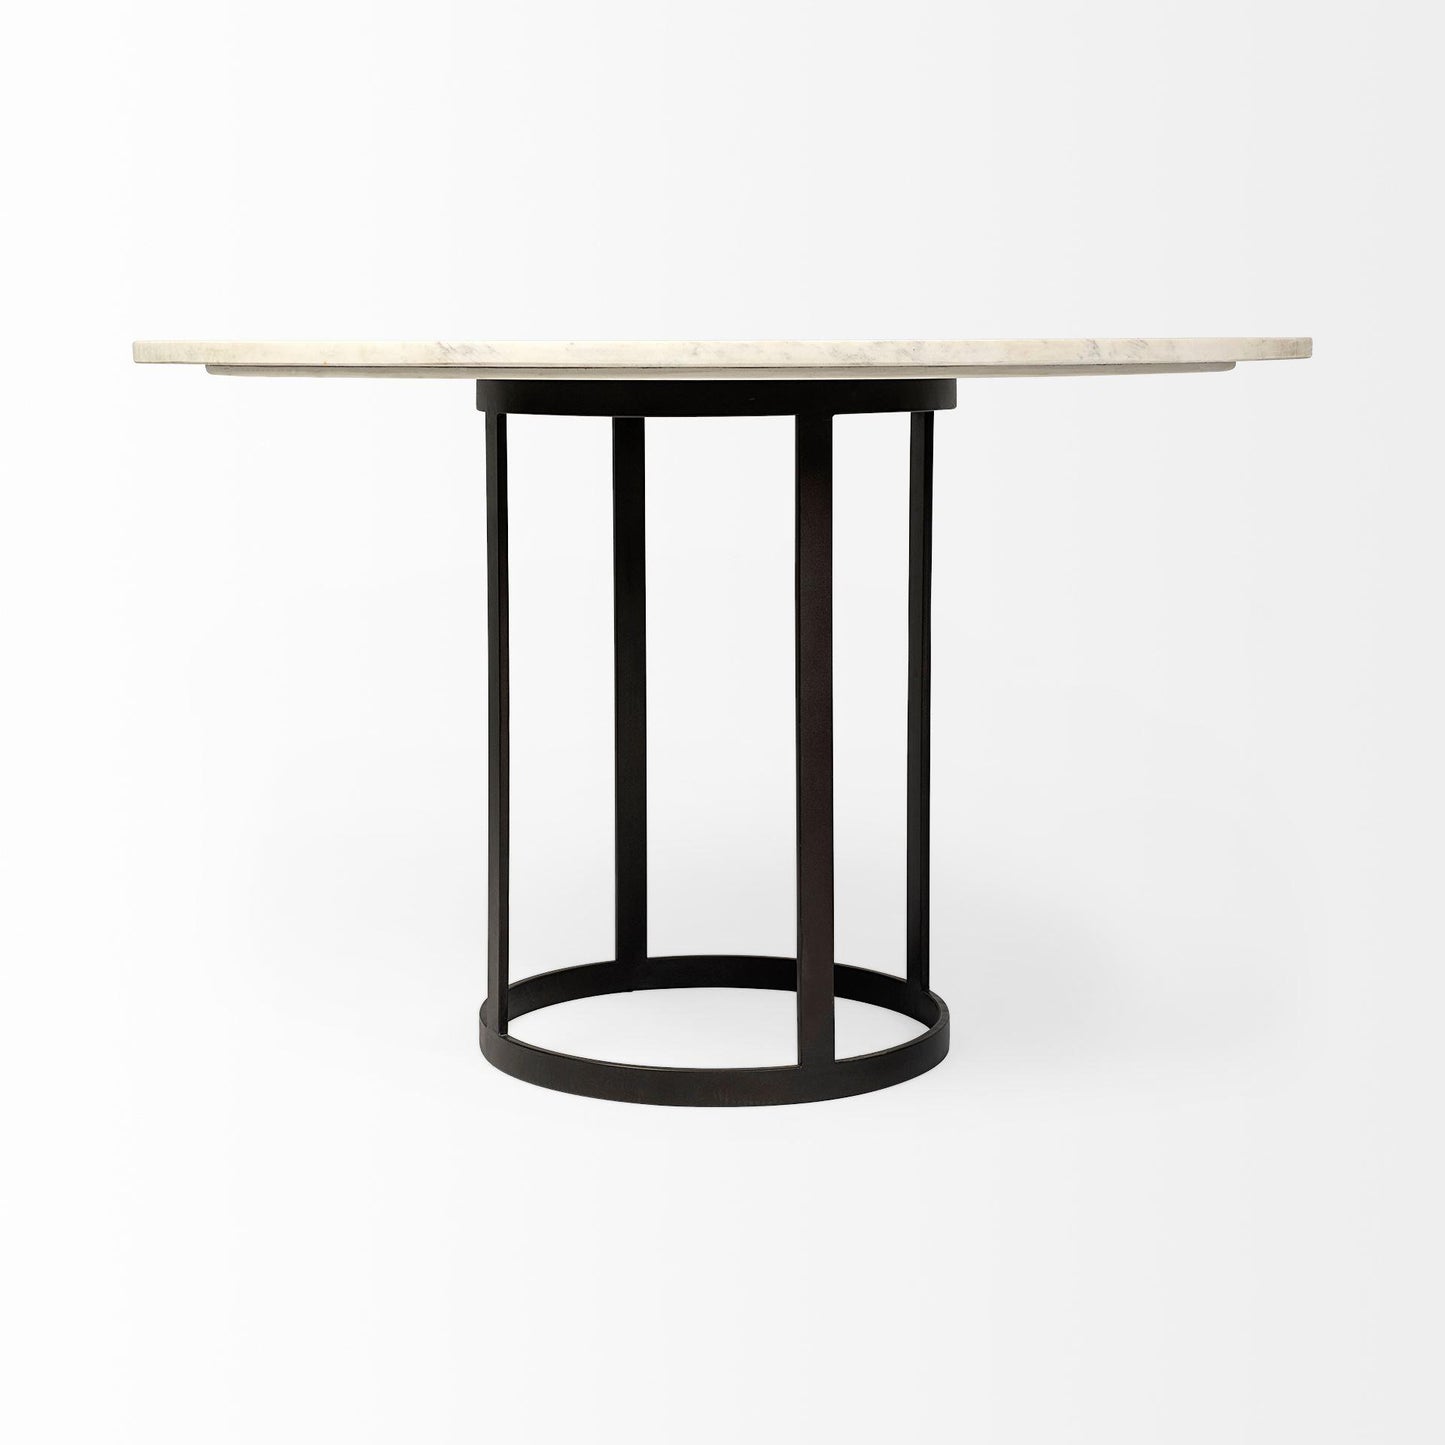 Tanner II 48" Round White Marble Top Black Metal Base Dining Table